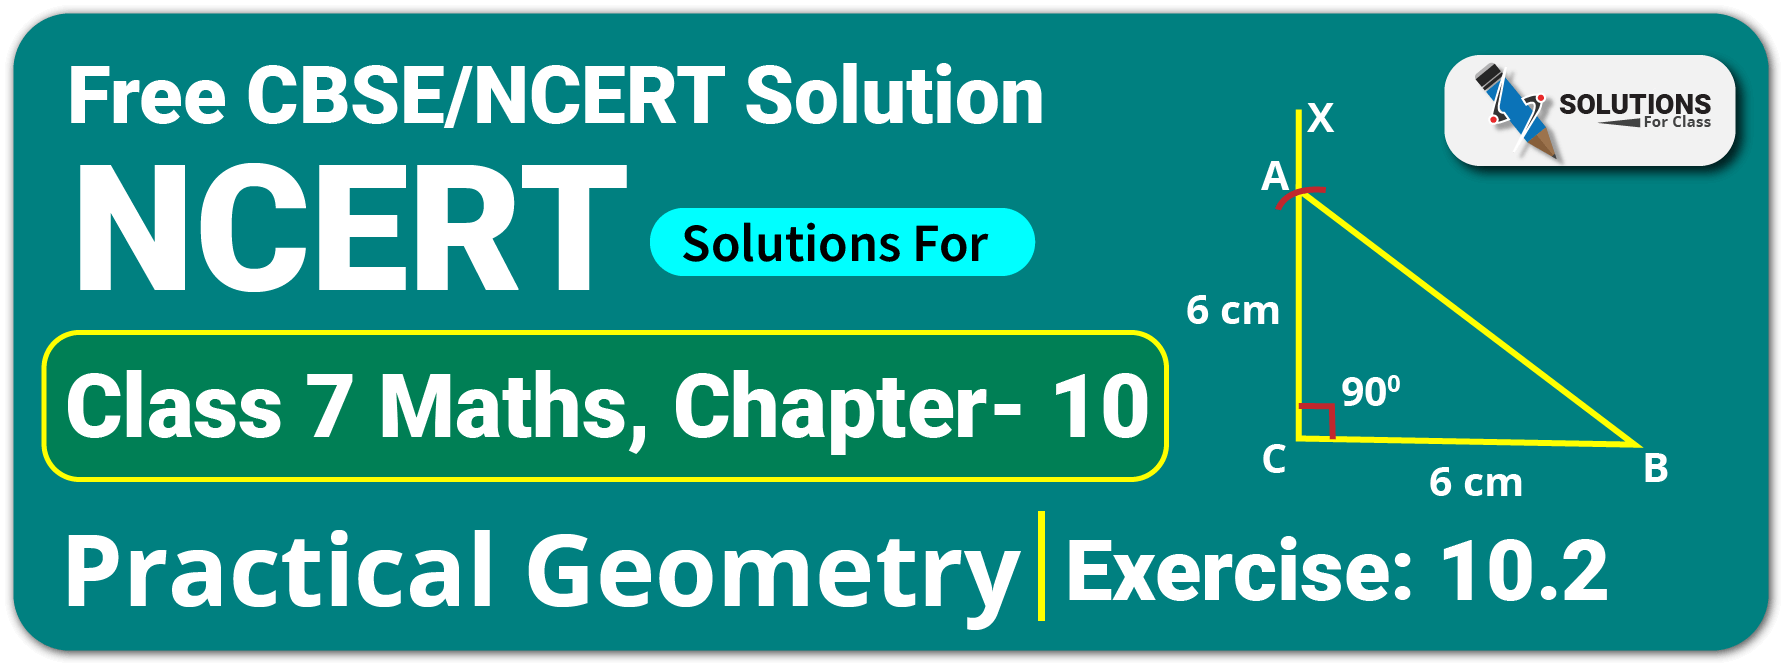 NCERT Solutions For Class 7 Maths Chapter 10 Practical Geometry Exercise 10.2